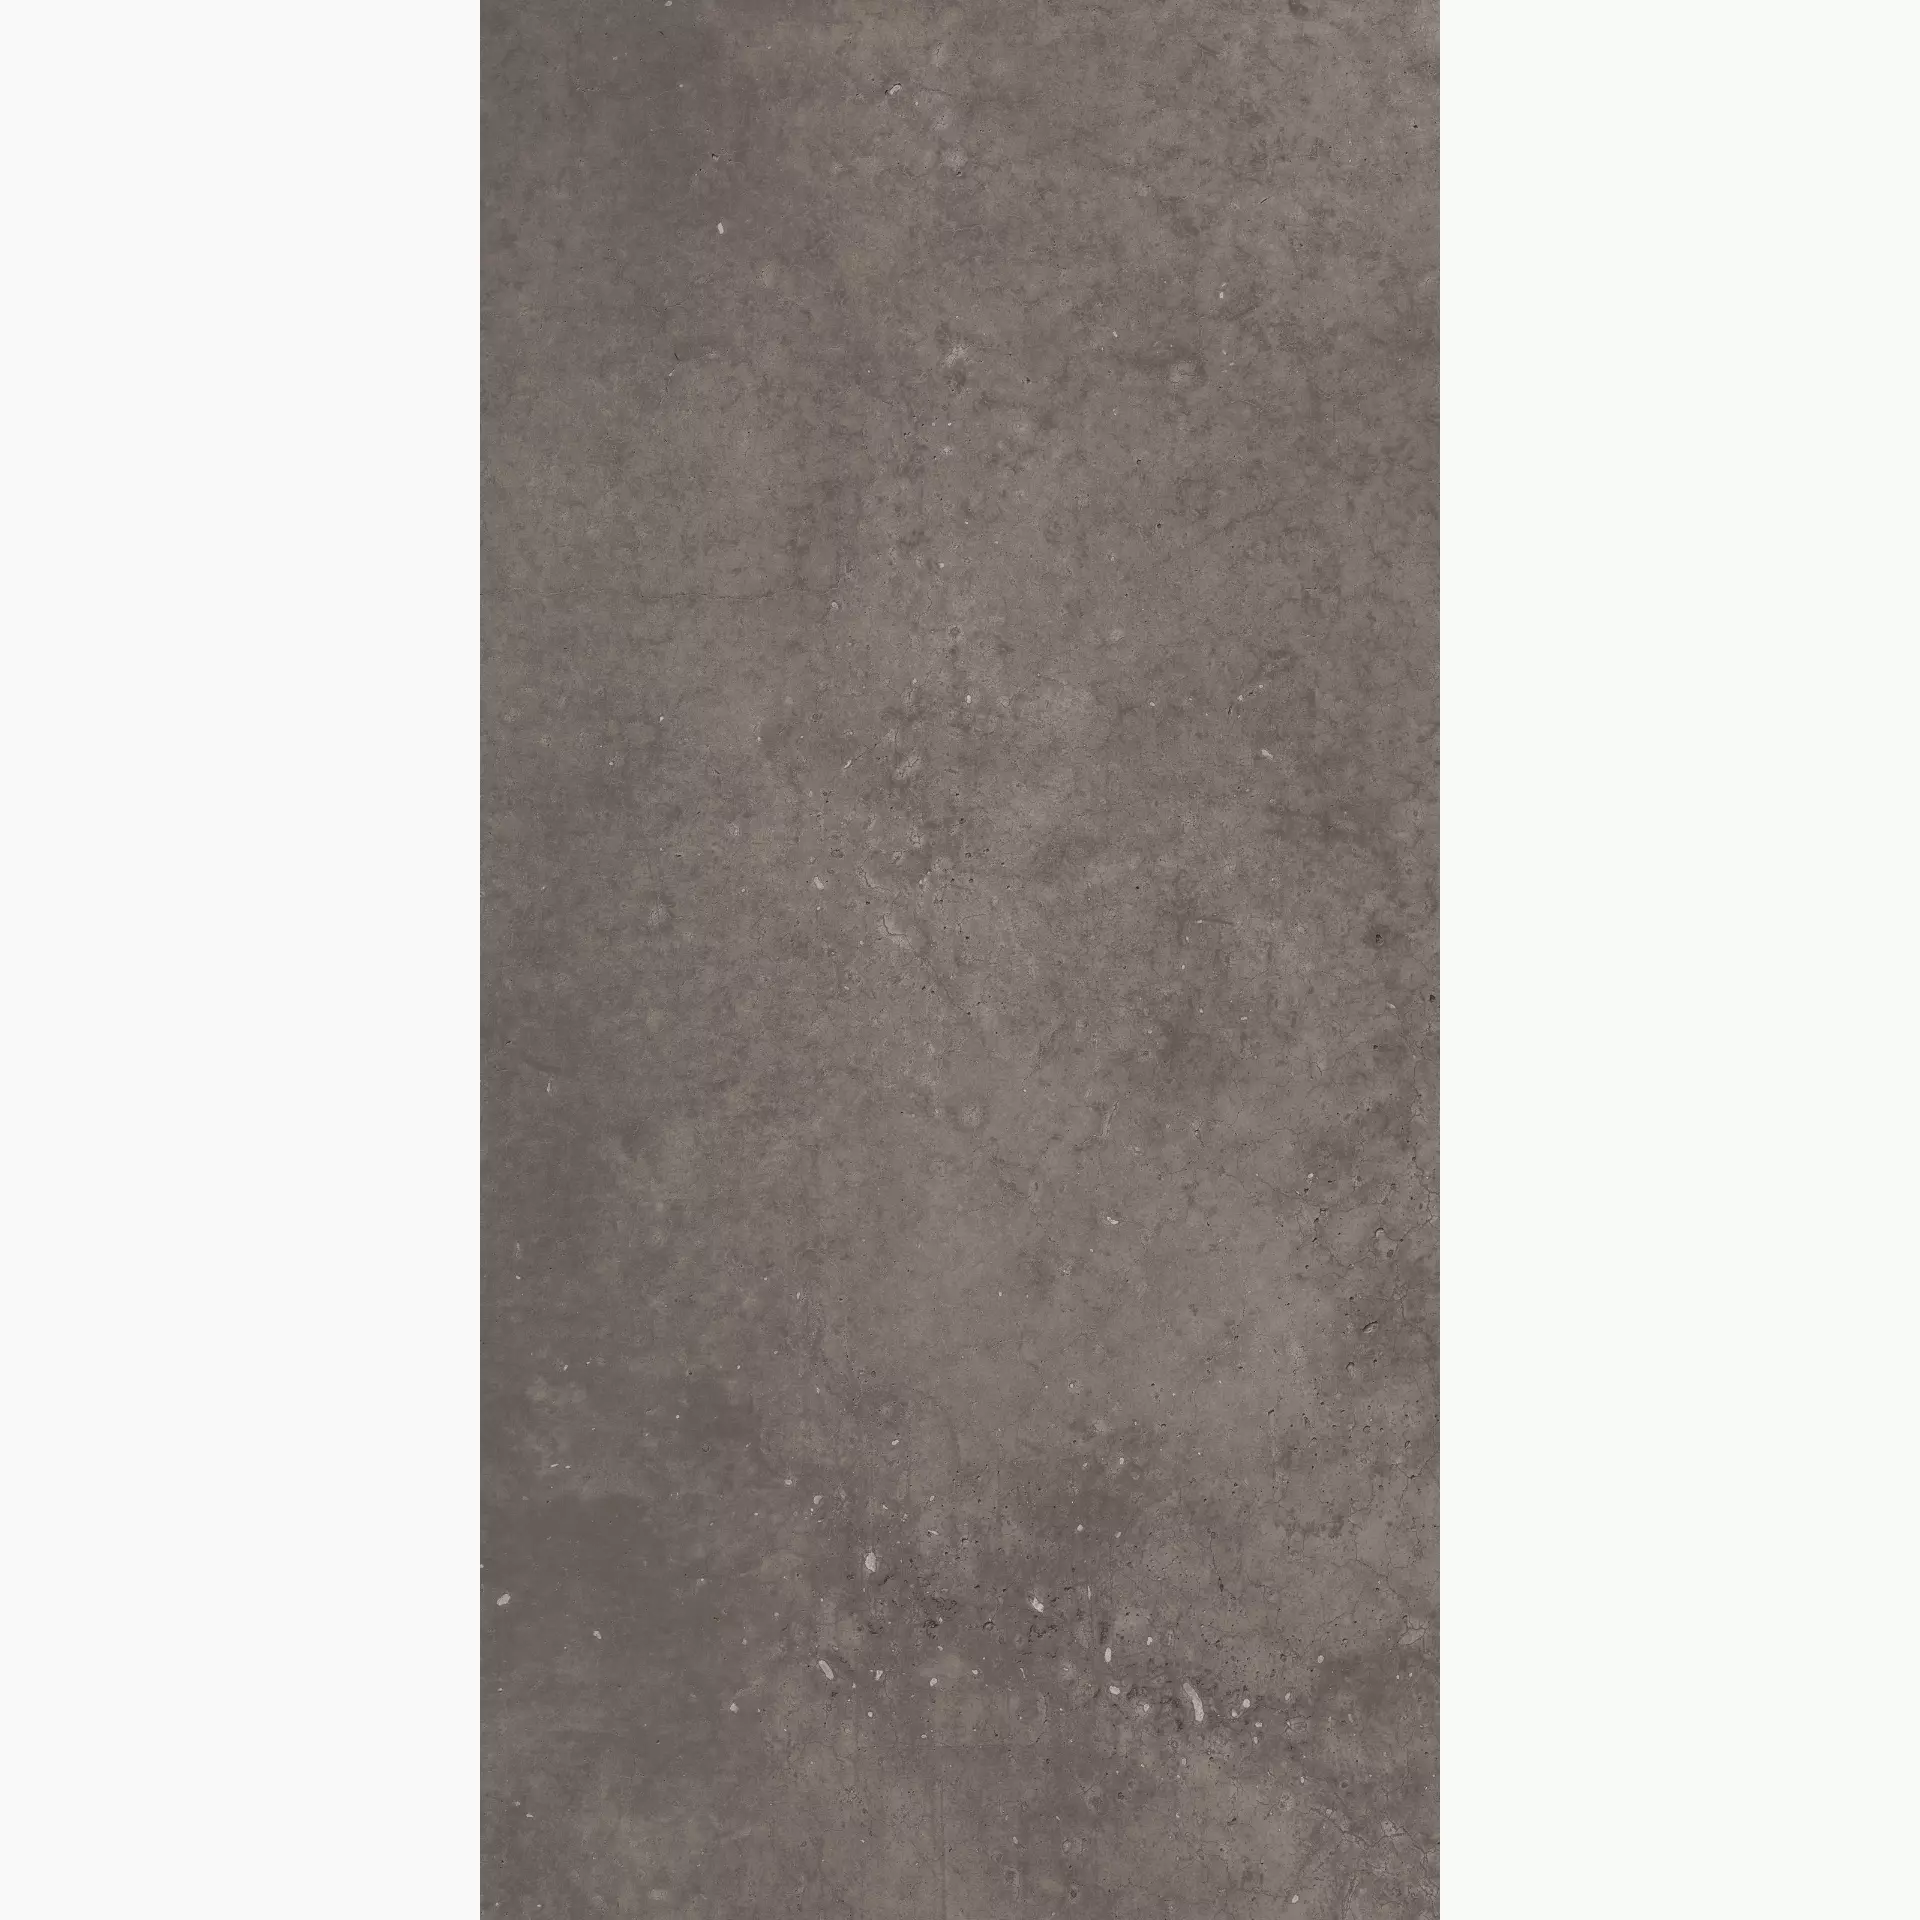 Flaviker X20 Taupe Outdoor Hyper PF60002772 60x120cm rectified 20mm